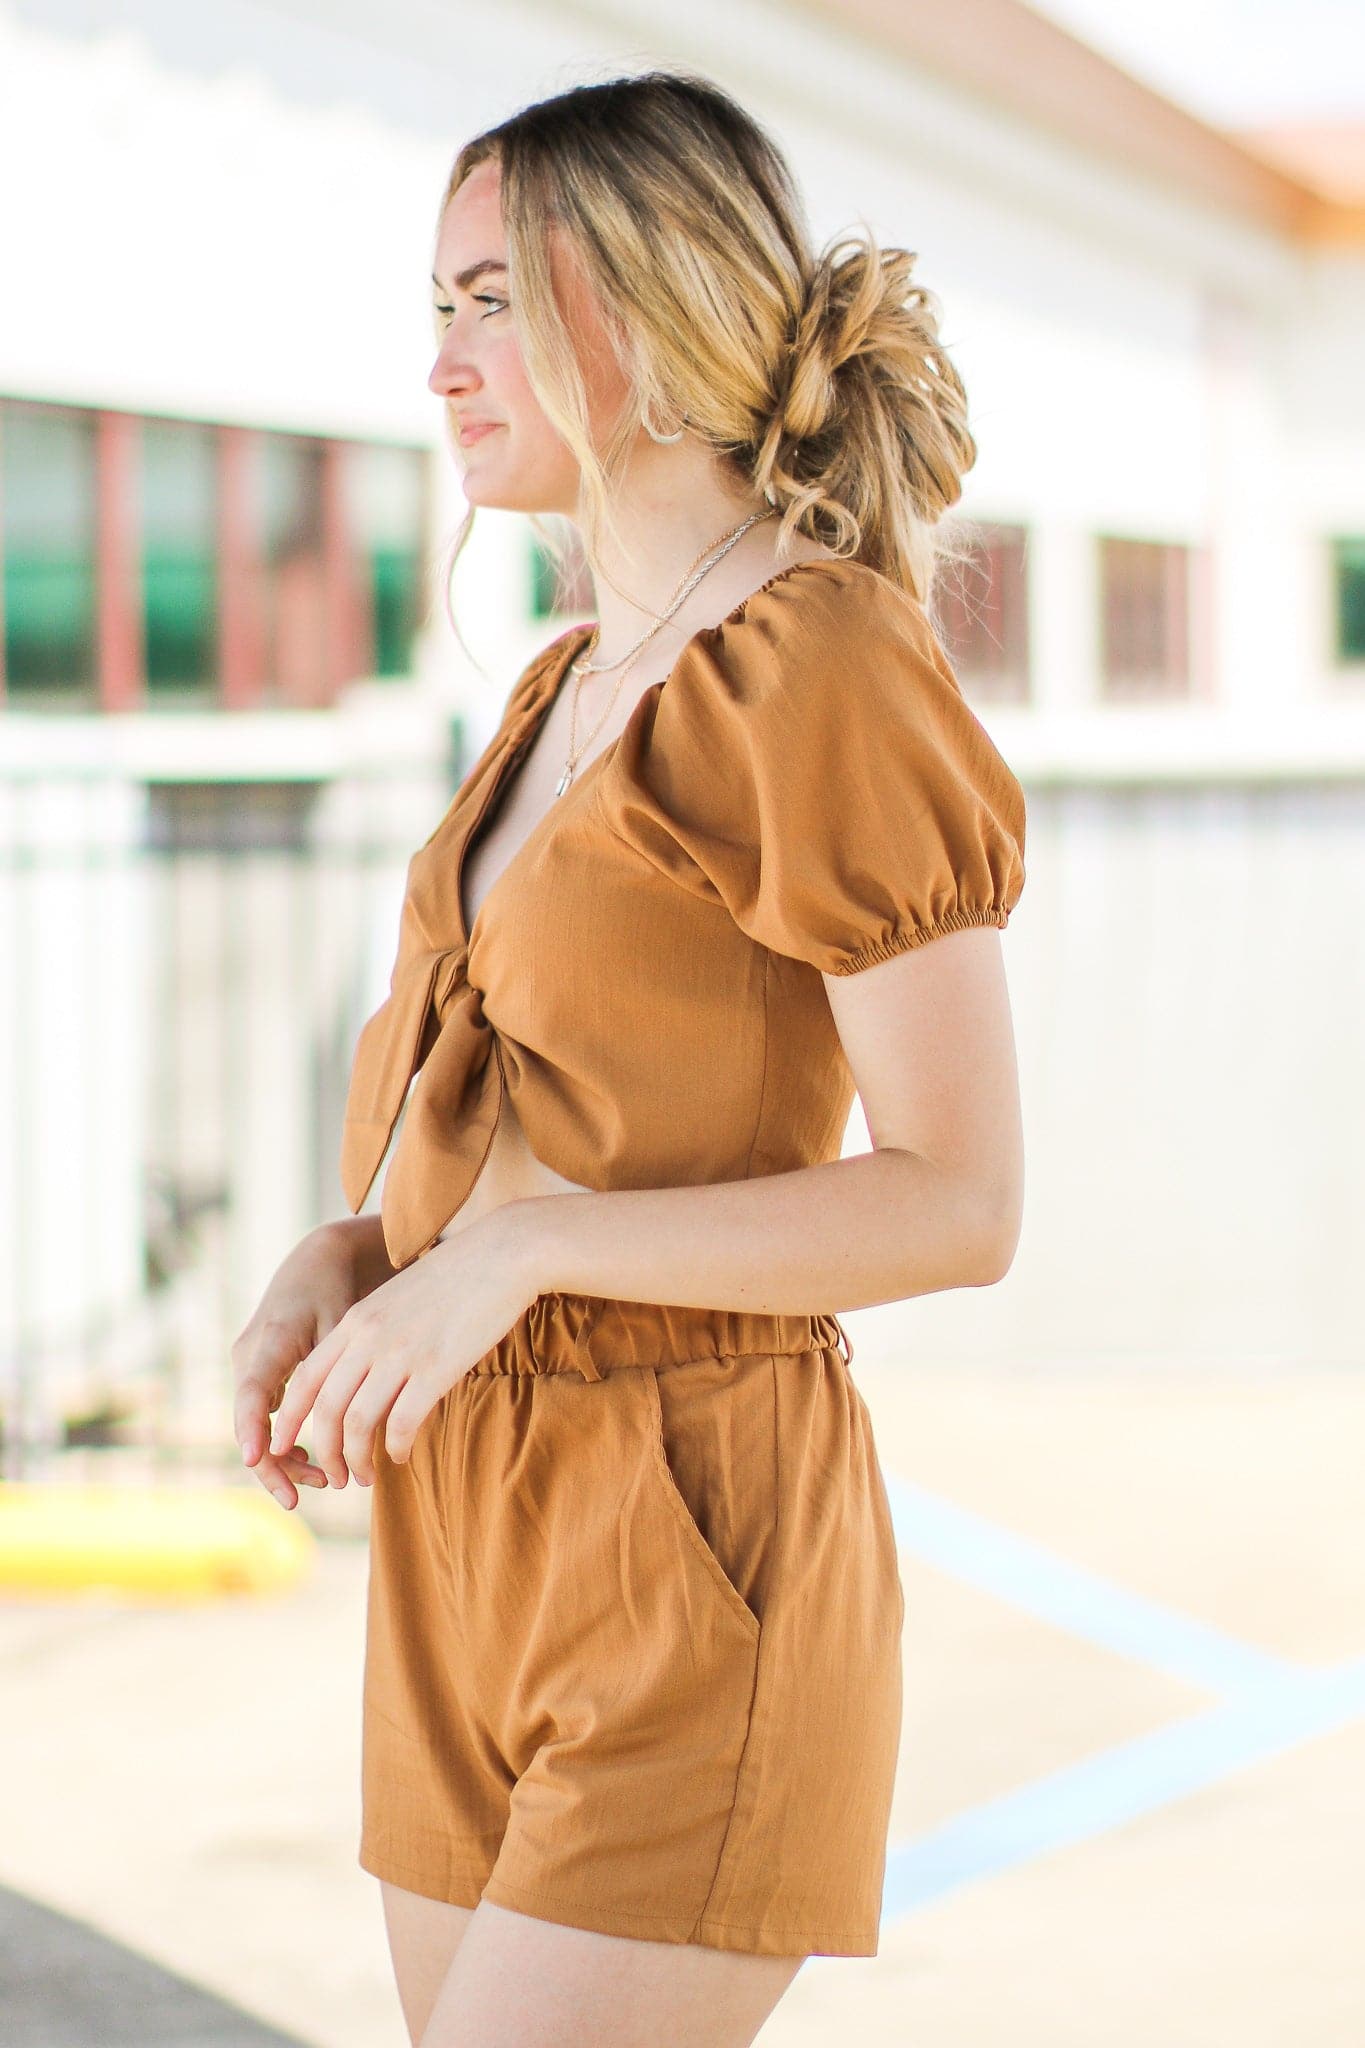  Come Drift Away Tie Front Ruffle Top and Shorts Set - FINAL SALE - Madison and Mallory